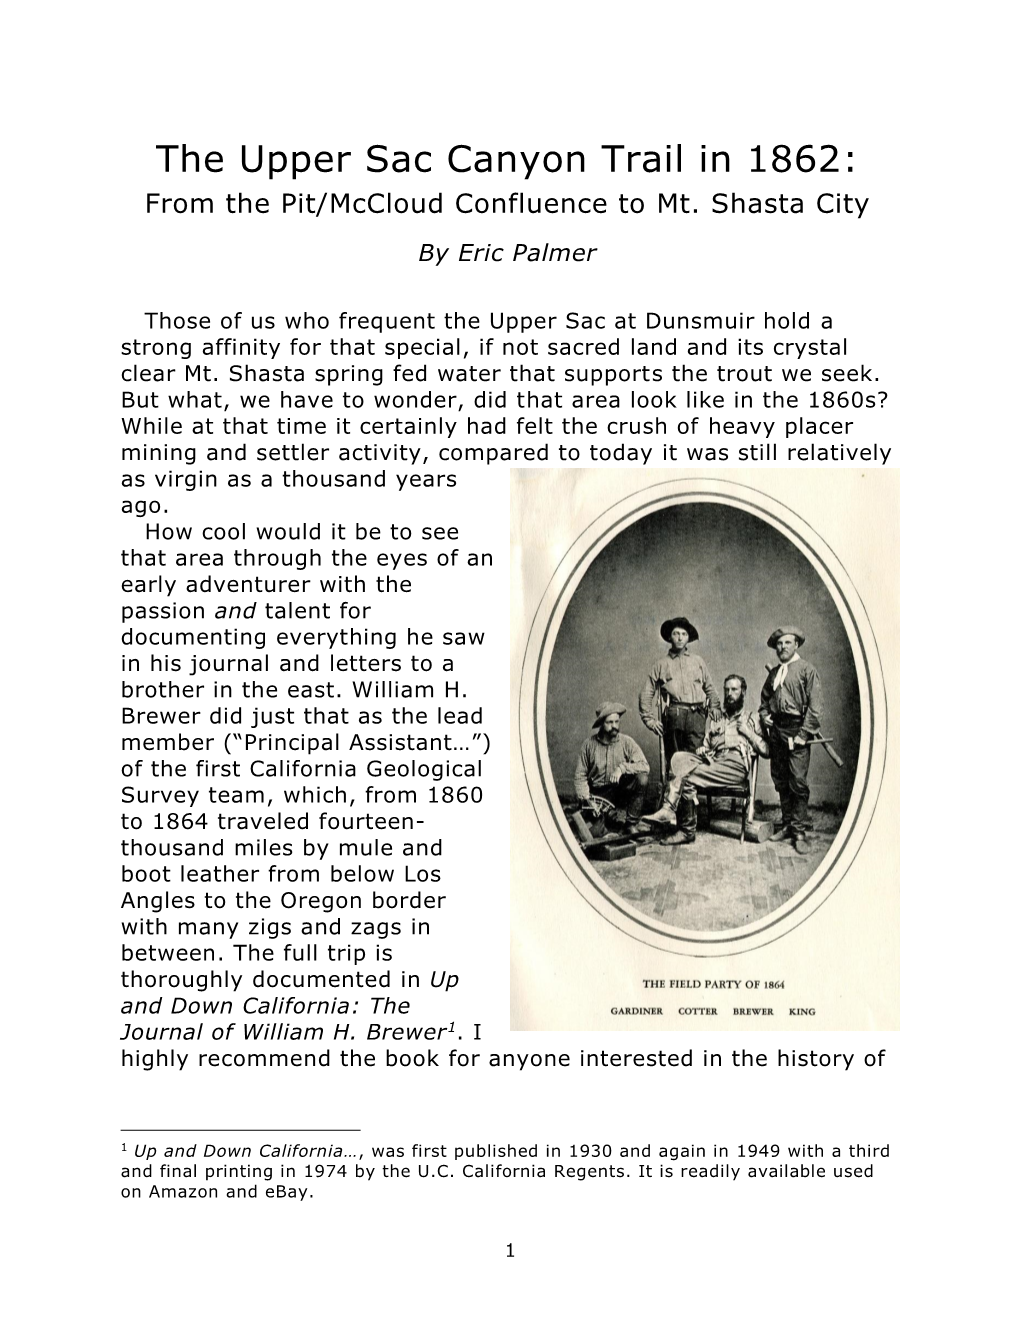 The Upper Sac Canyon Trail in 1862: from the Pit/Mccloud Confluence to Mt